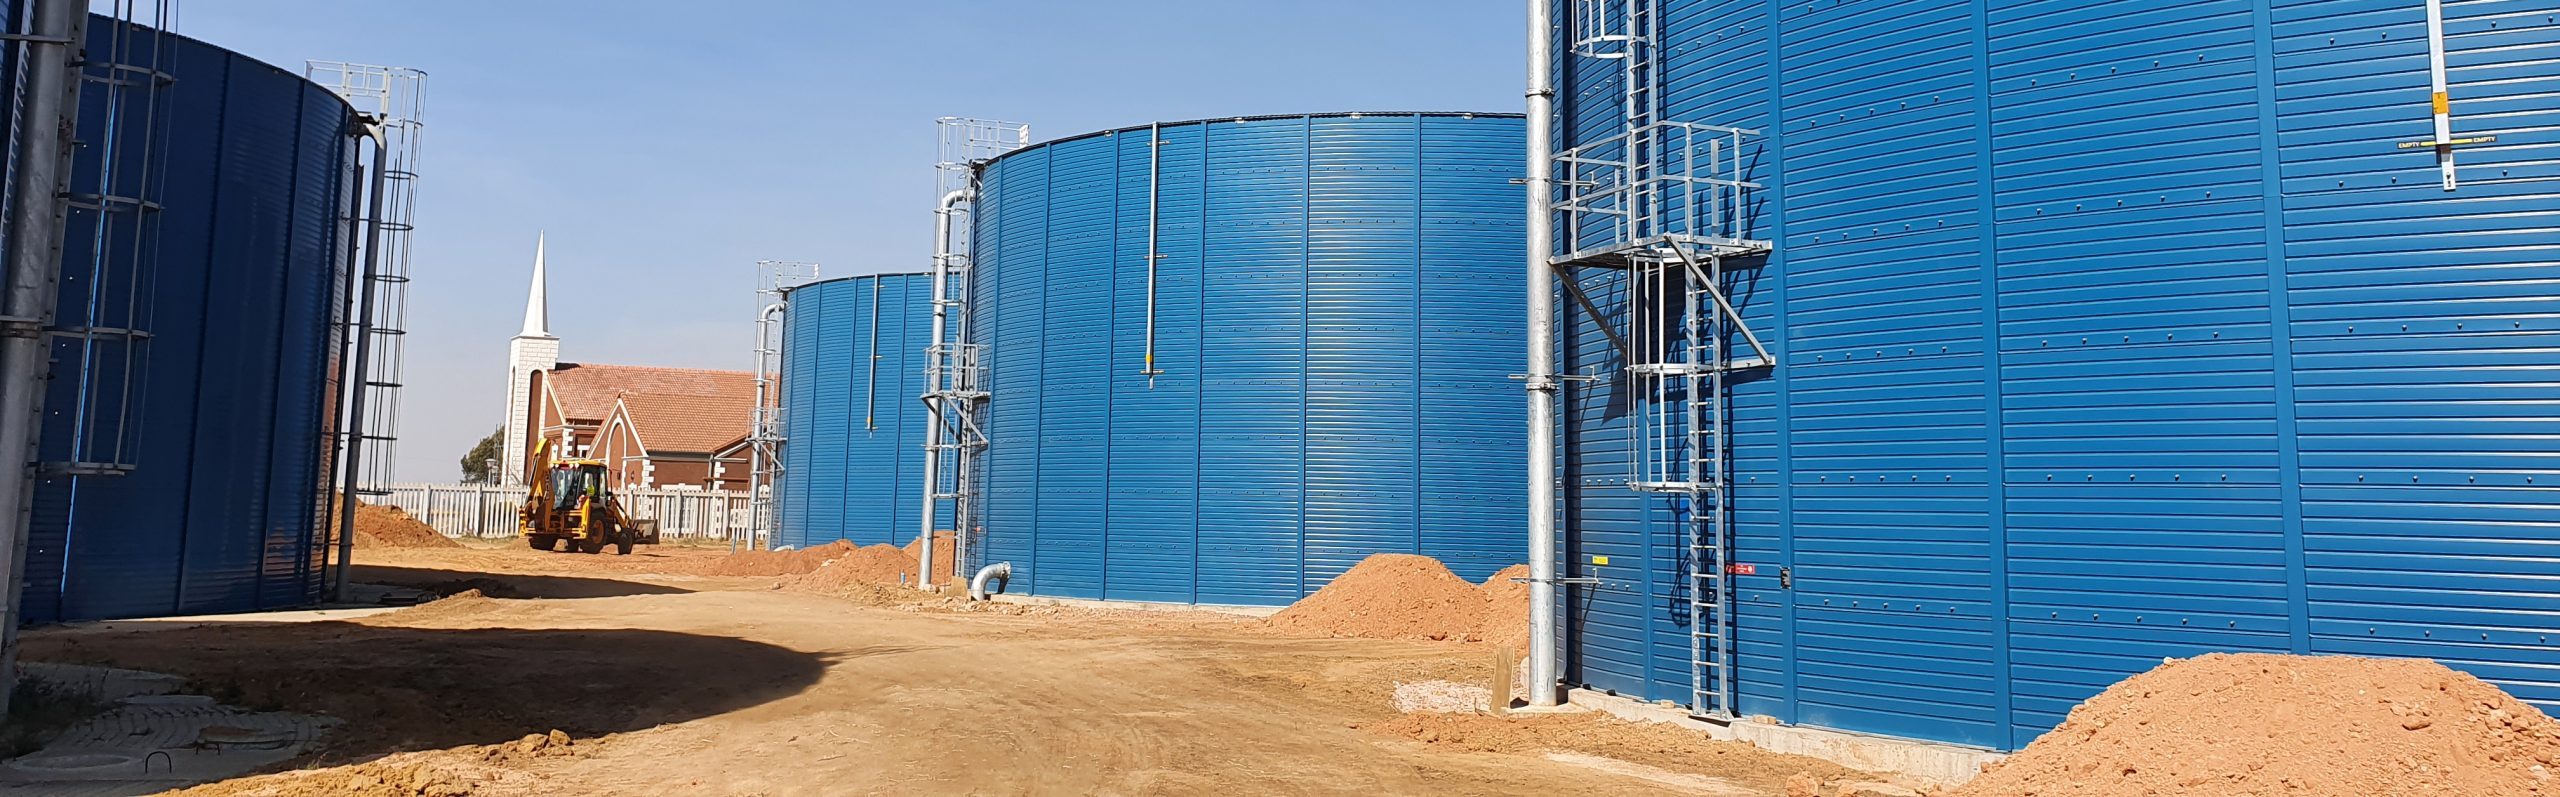 SBS-Group-Tank Farm EmalahleniWater technology delivers benefits at community levelGeneral